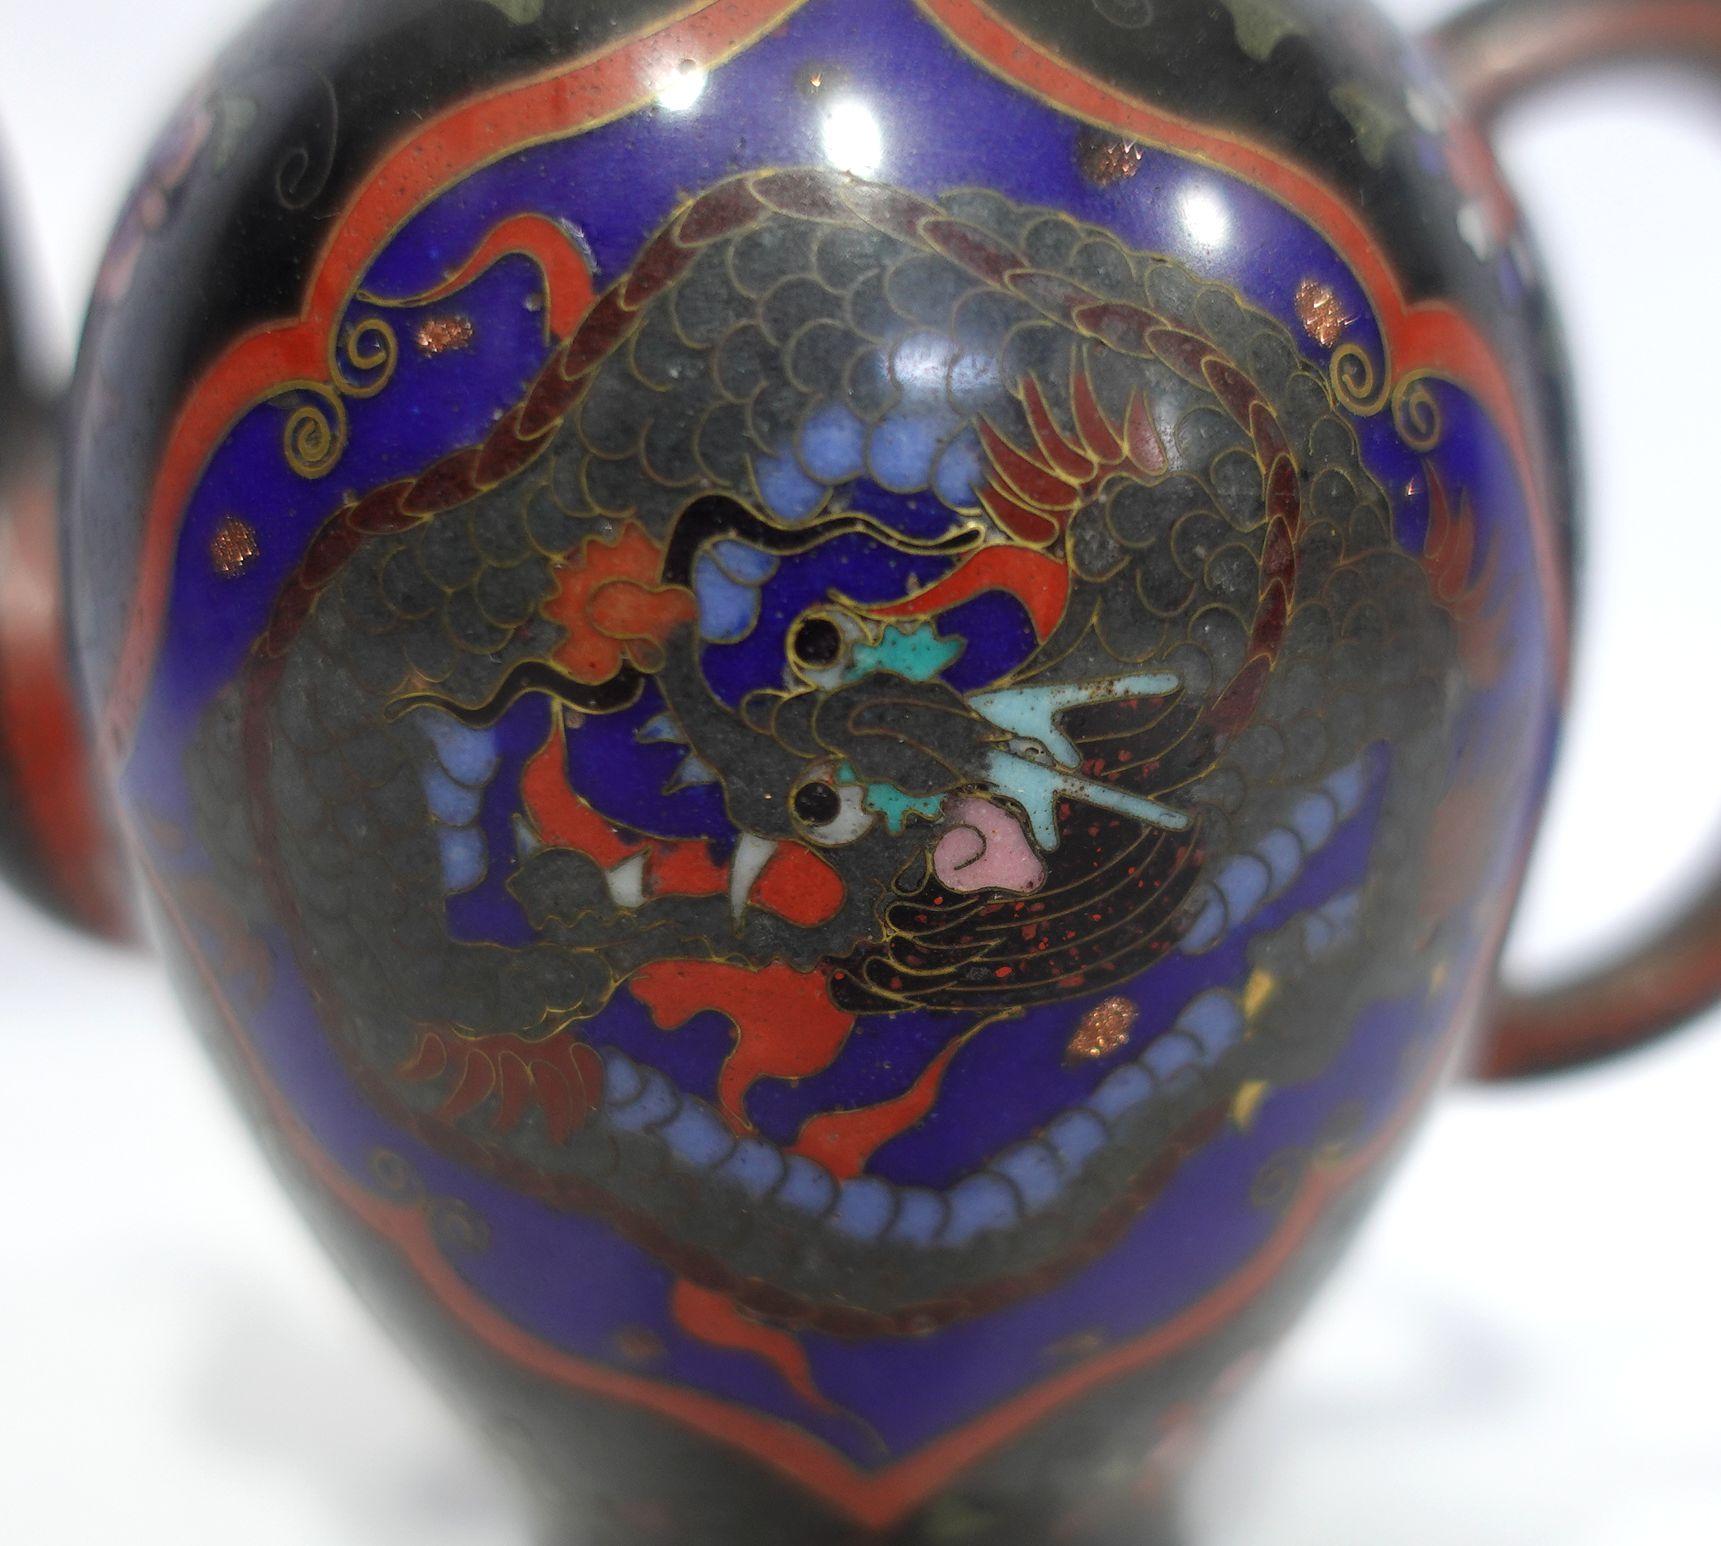 Quality work, amazing workmanship with absolutely fine details bronze cloisonné enameled teapot depicting the scene of a flying dragon with vivid colors of yellow, light golden green, red, blue, brown, and gold.
